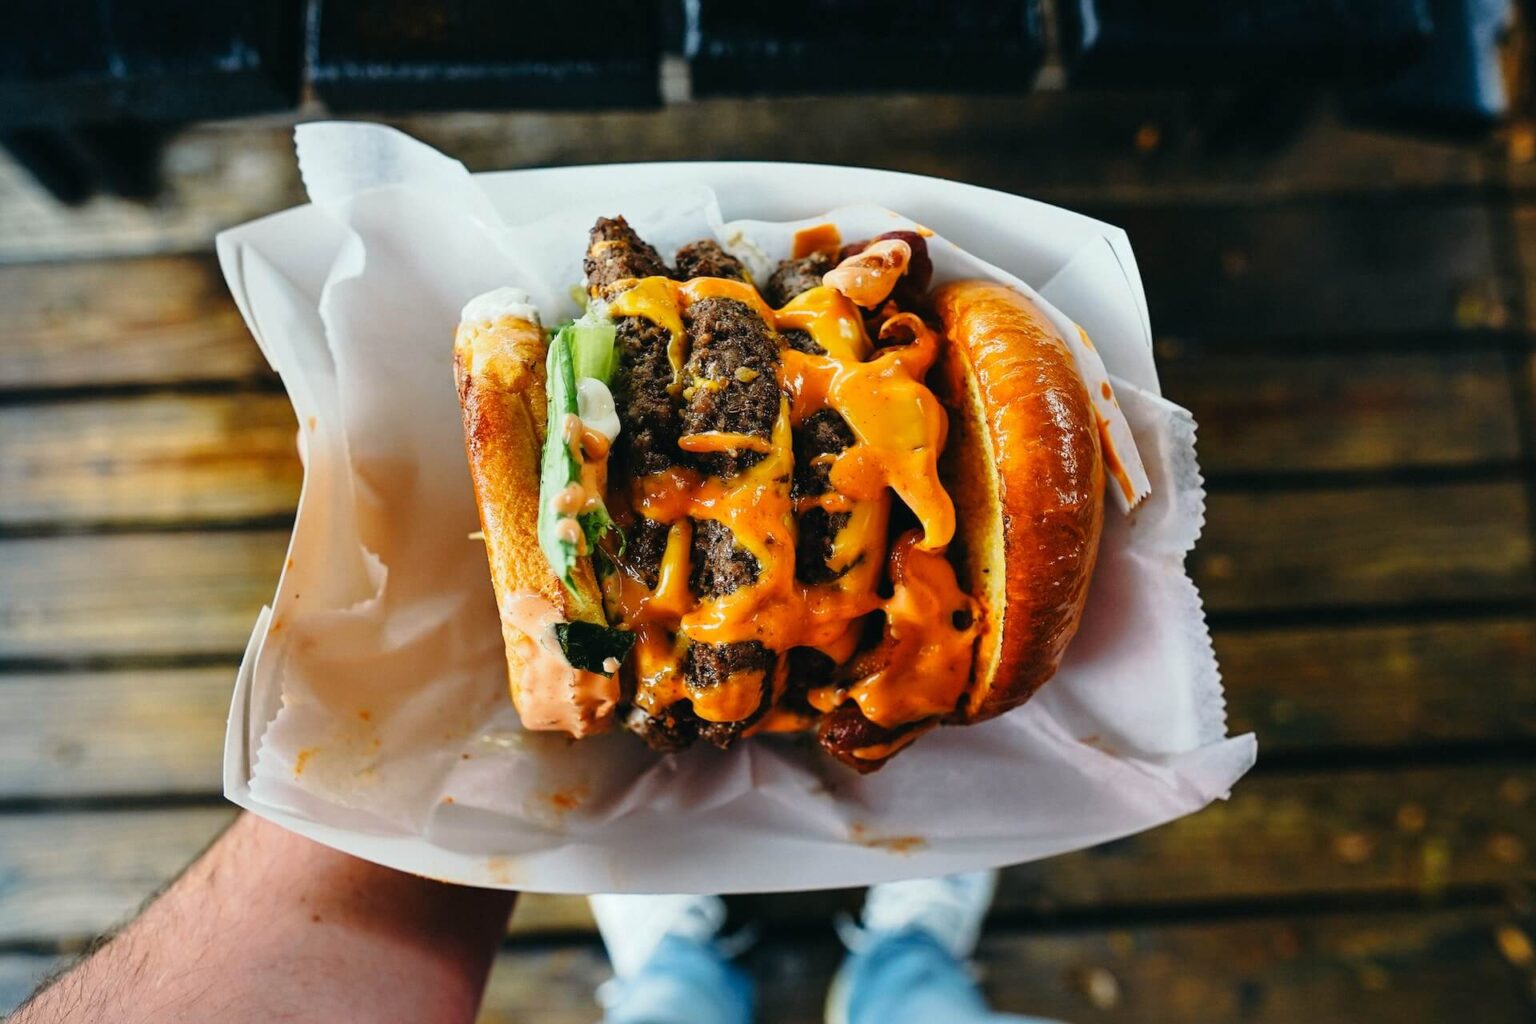 A mouth-watering burger with cheese and toppings - the search for Bristol's best burger